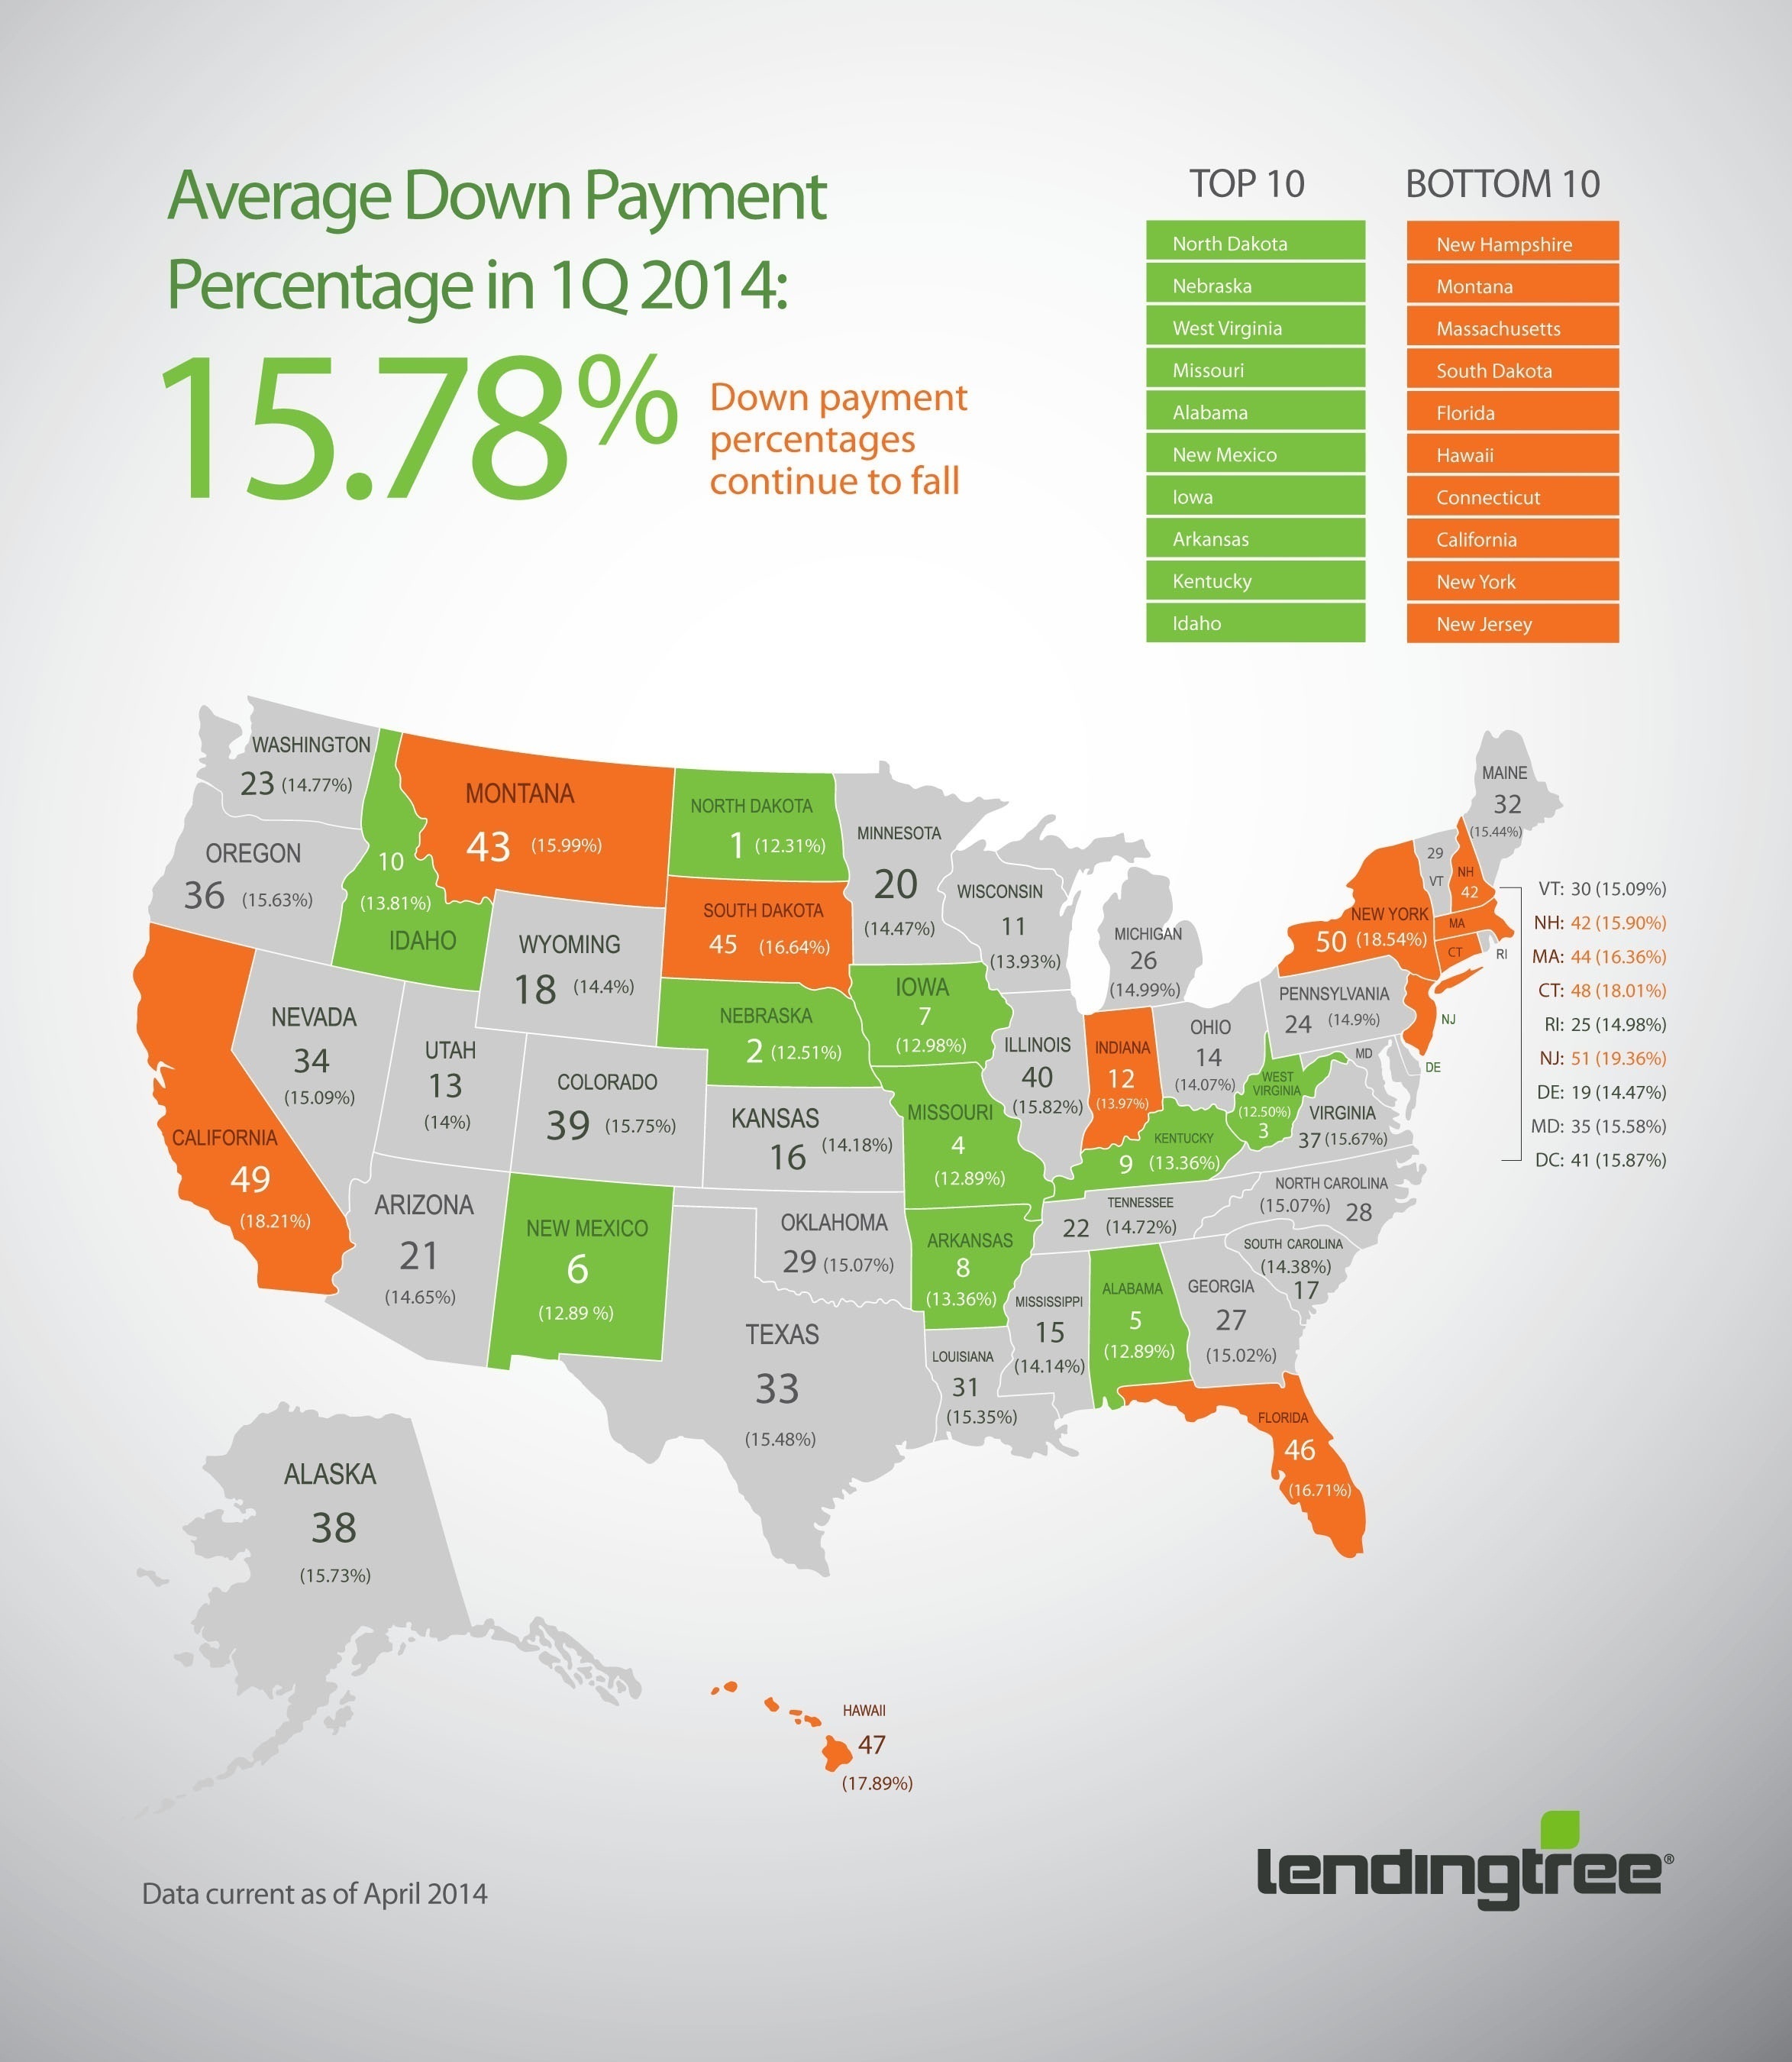 LendingTree Average Down Payment Report:  US Average Down Payment Percentage Falls to 15.78% in Q1 2014 - Mortgage lenders loosen standards as rates rise and the housing market improves. (PRNewsFoto/LendingTree, LLC)